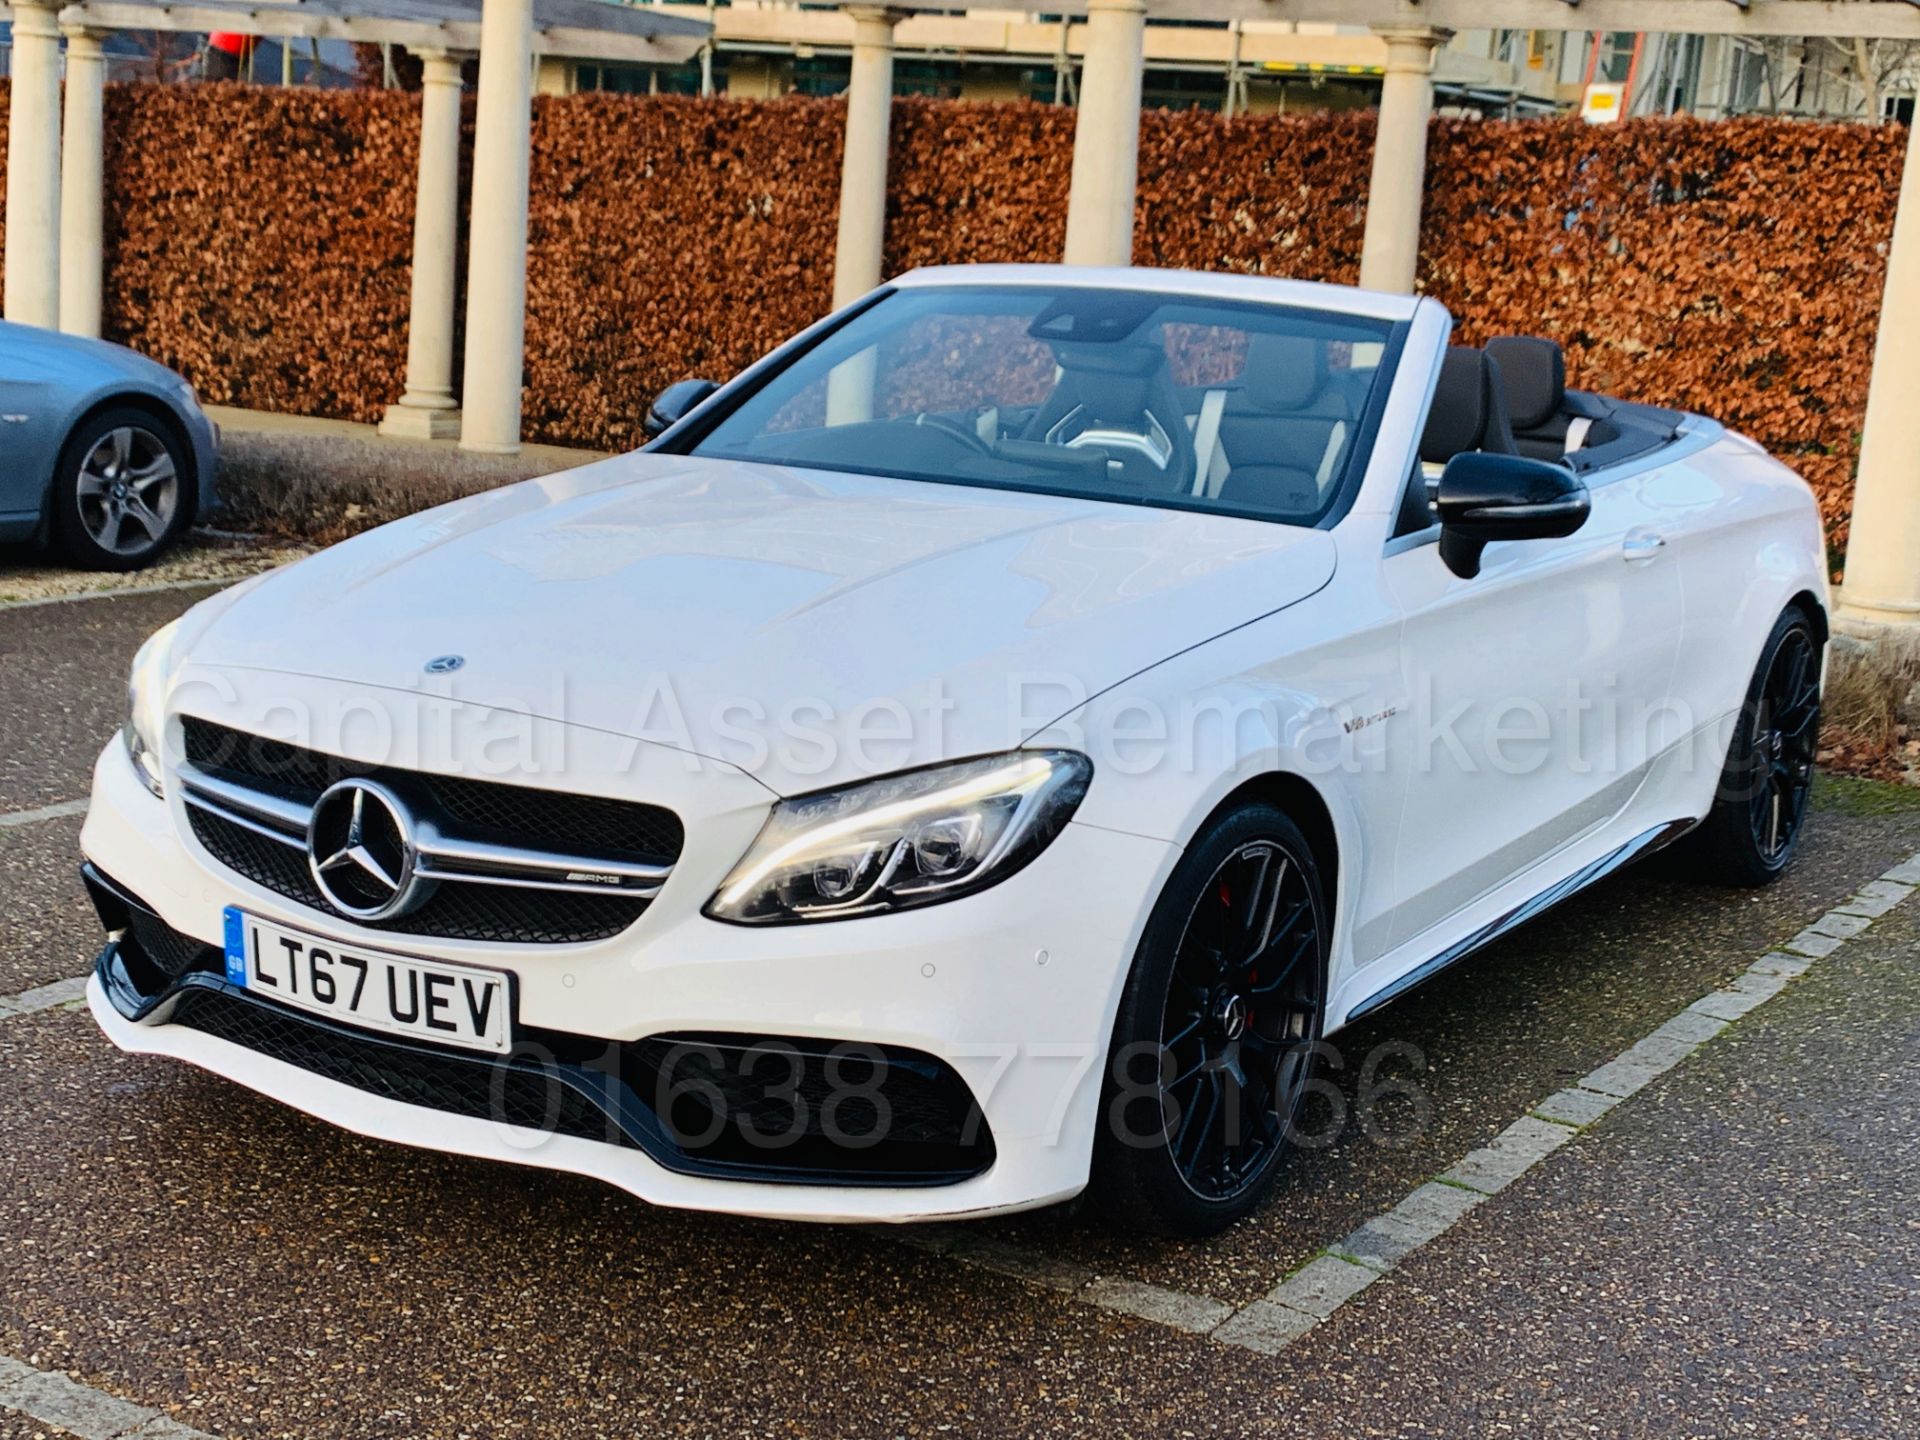 (On Sale) MERCEDES-BENZ AMG C63-S *CABRIOLET* (67 REG) '4.0 BI-TURBO -510 BHP - AUTO' *FULLY LOADED* - Image 9 of 79